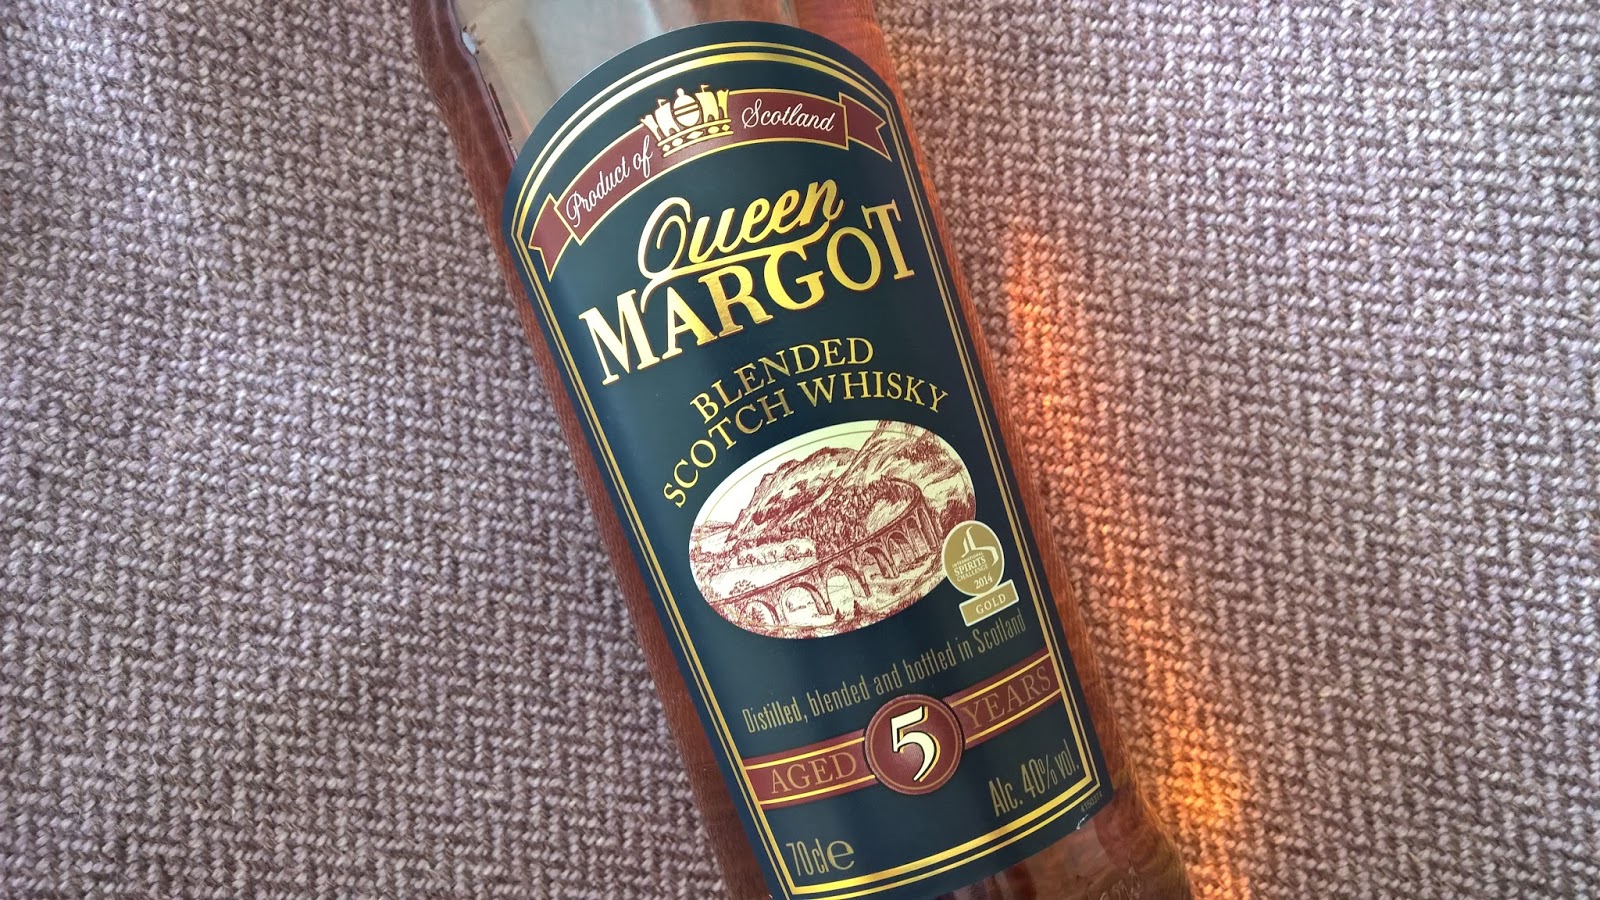 Review: Queen Scotch Blended Margot Whisky